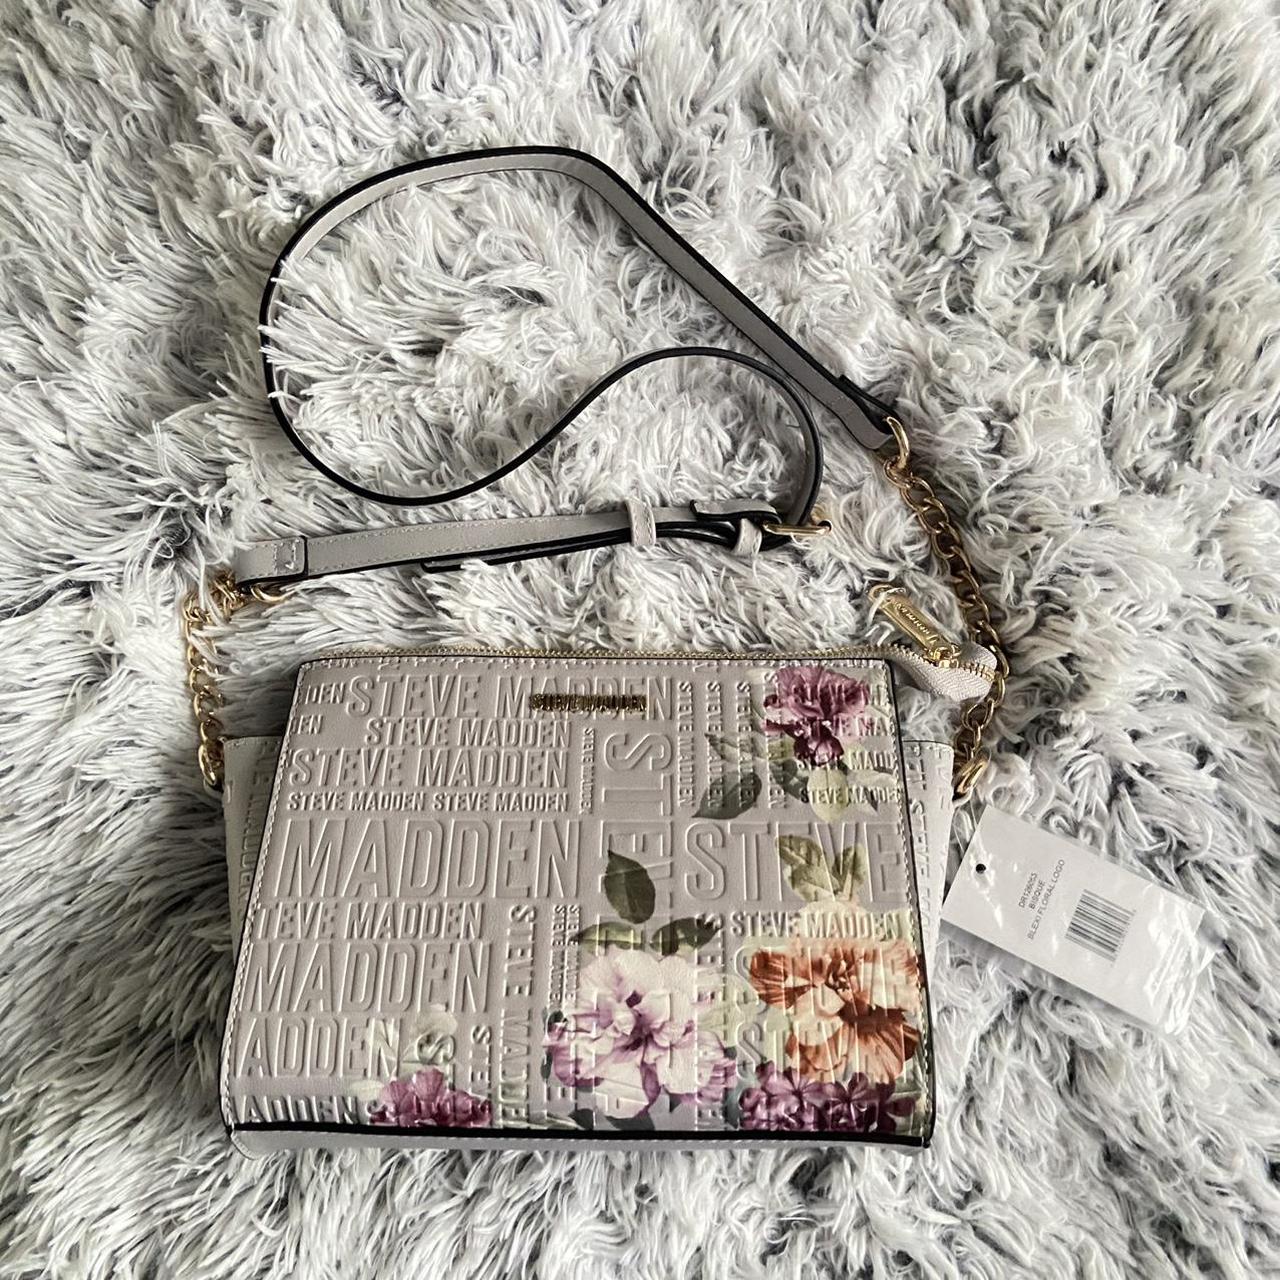 STEVE MADDEN WALLET WRISTLET BISQUE/GRAY TWO TONE 